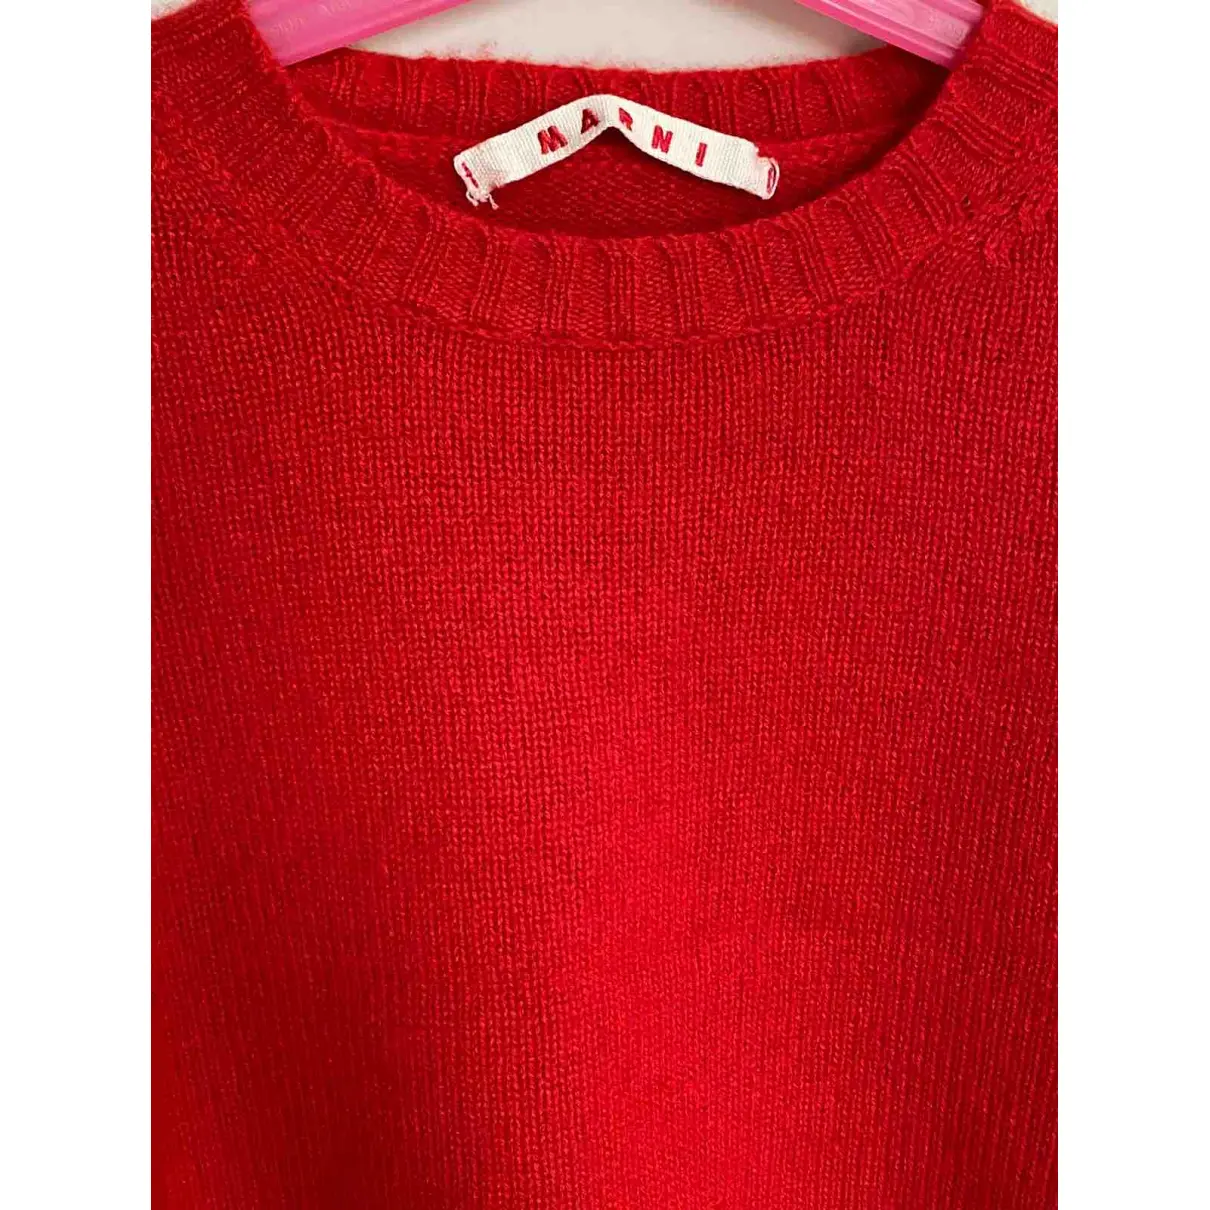 Buy Marni Cashmere sweater online